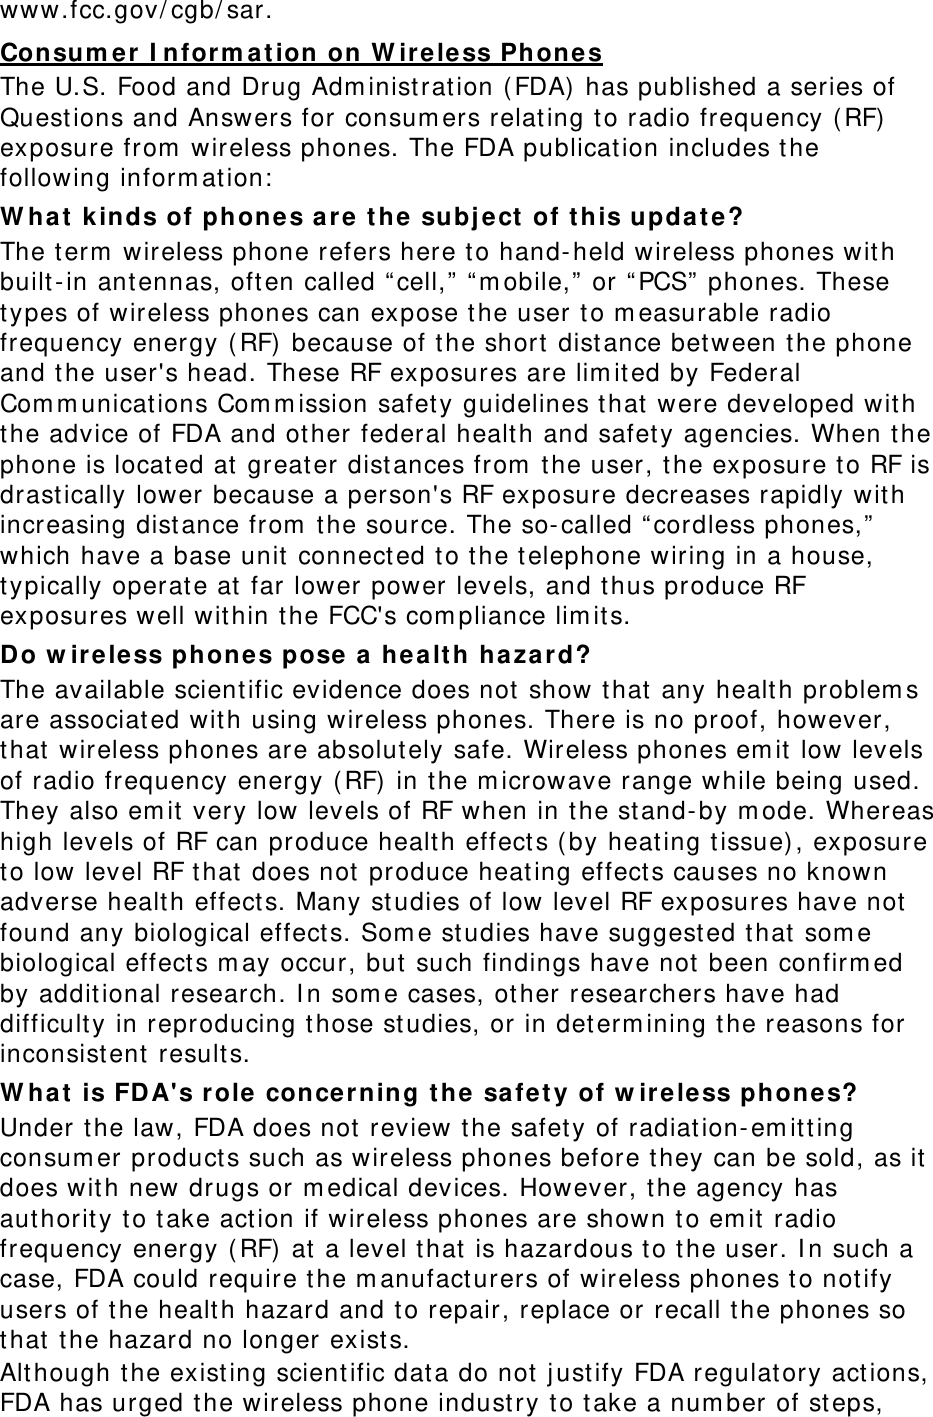 www.fcc.gov/ cgb/ sar. Consum er I nform ation on W ir ele ss Phones The U.S. Food and Drug Adm inist ration (FDA) has published a series of Questions and Answers for consum ers relating to radio frequency (RF)  exposure from  wireless phones. The FDA publication includes t he following inform at ion:  W hat kinds of phone s are  t he subj ect  of t his update? The t erm  wireless phone refers here t o hand- held wireless phones with built-in ant ennas, often called “ cell,”  “ m obile,”  or “ PCS”  phones. These types of wireless phones can expose t he user t o m easurable radio frequency energy ( RF)  because of t he short dist ance bet ween the phone and the user&apos;s head. These RF exposures are lim ited by Federal Com m unications Com m ission safety guidelines t hat  were developed with the advice of FDA and ot her federal healt h and safet y agencies. When t he phone is located at greater dist ances from  t he user, the exposure t o RF is drast ically lower because a person&apos;s RF exposure decreases rapidly with increasing distance from  the source. The so- called “ cordless phones,”  which have a base unit connect ed t o the telephone wiring in a house, typically operate at far lower power levels, and t hus produce RF exposures well wit hin the FCC&apos;s com pliance lim its. Do w ir ele ss ph ones pose a h ea lt h hazar d? The available scient ific evidence does not  show t hat any health problem s are associated wit h using wireless phones. There is no proof, however, that wireless phones are absolutely safe. Wireless phones em it low levels of radio frequency energy ( RF)  in t he m icrowave range while being used. They also em it very low levels of RF when in the st and- by m ode. Whereas high levels of RF can produce health effect s ( by heat ing tissue), exposure to low level RF that  does not  produce heating effect s causes no known adverse healt h effect s. Many studies of low level RF exposures have not found any biological effect s. Som e studies have suggest ed that  som e biological effect s m ay occur, but  such findings have not been confirm ed by additional research. I n som e cases, other researchers have had difficulty in reproducing t hose studies, or in det erm ining t he reasons for inconsist ent  results. W hat is FD A&apos;s role  concer ning t he  sa fet y of w ireless phone s? Under the law, FDA does not review the safet y of radiation- em itting consum er product s such as wireless phones before they can be sold, as it  does wit h new drugs or m edical devices. However, t he agency has aut hority to take act ion if wireless phones are shown t o em it  radio frequency energy ( RF)  at  a level that  is hazardous t o t he user. I n such a case, FDA could require the m anufact urers of w ireless phones to not ify users of t he health hazard and to repair, replace or recall t he phones so that the hazard no longer exist s. Alt hough t he exist ing scientific data do not j ust ify FDA regulatory act ions, FDA has urged t he wireless phone industry to take a num ber of st eps, 